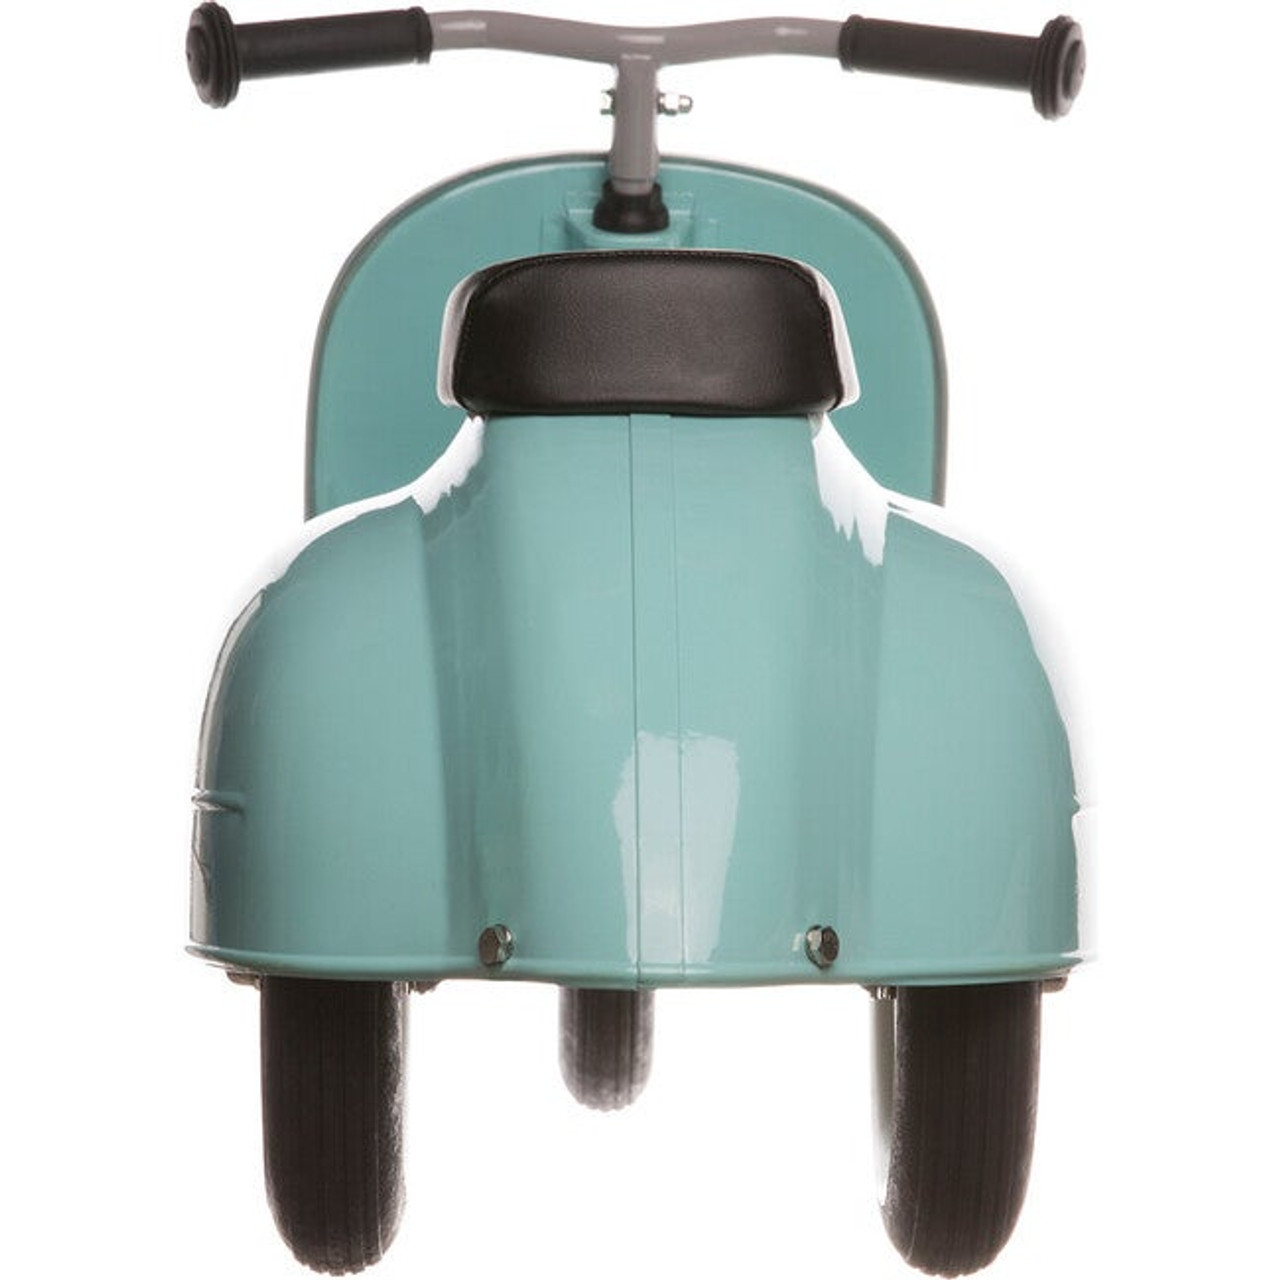 Primo Basic Mint Scooter